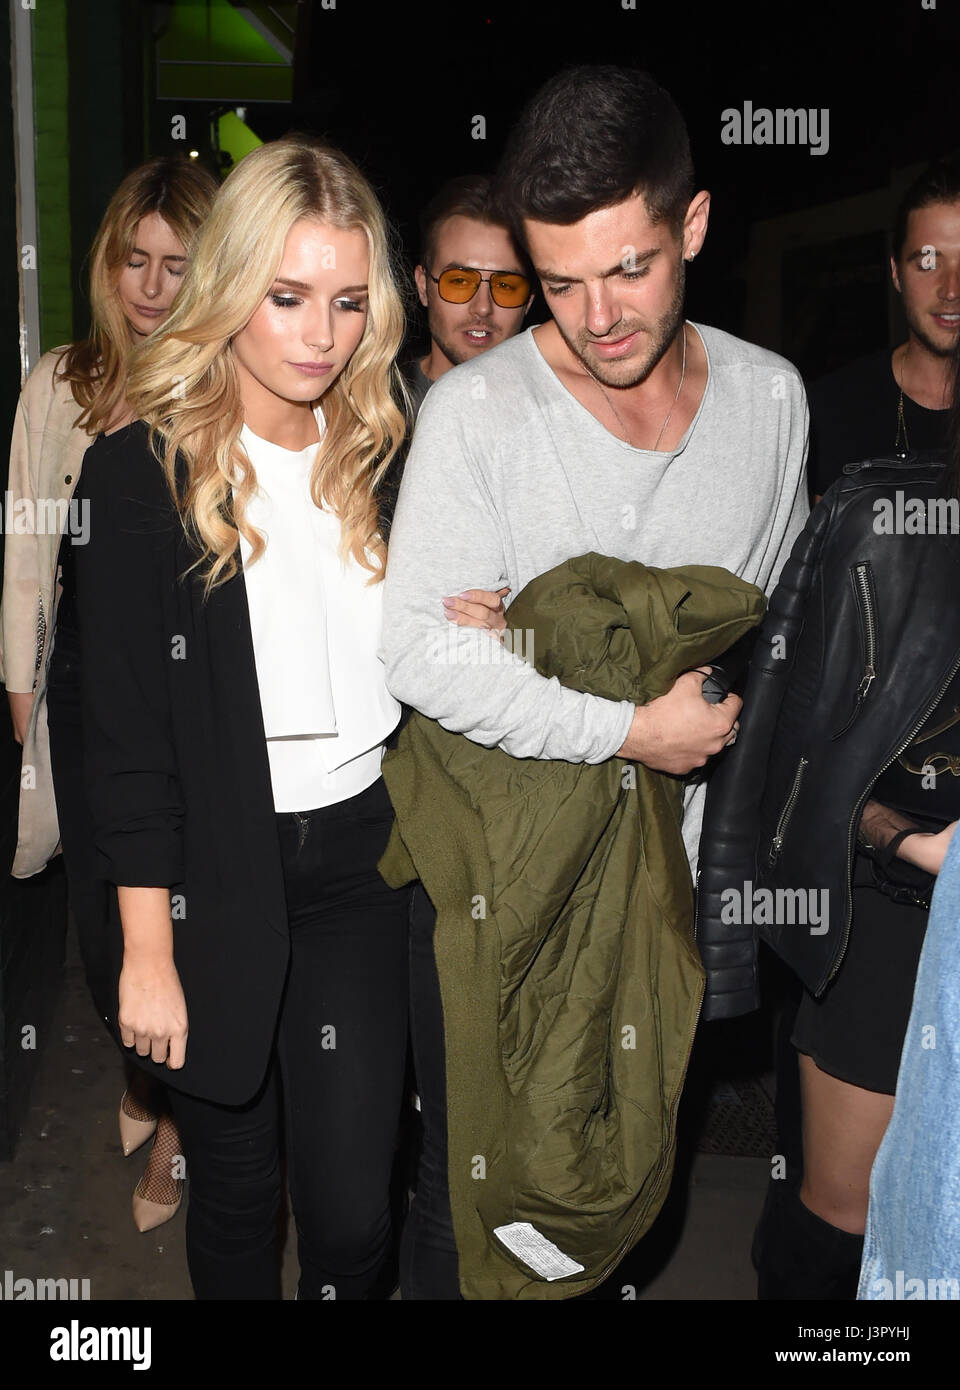 Lottie Moss and Alex Mytton seen looking cosy following rumoured split and arguments. Alex and Lottie were seen arm in arm as they left Bunga Bunga Nightclub Featuring: Lottie Moss, Alex Mytton Where: London, United Kingdom When: 06 Apr 2017 Stock Photo